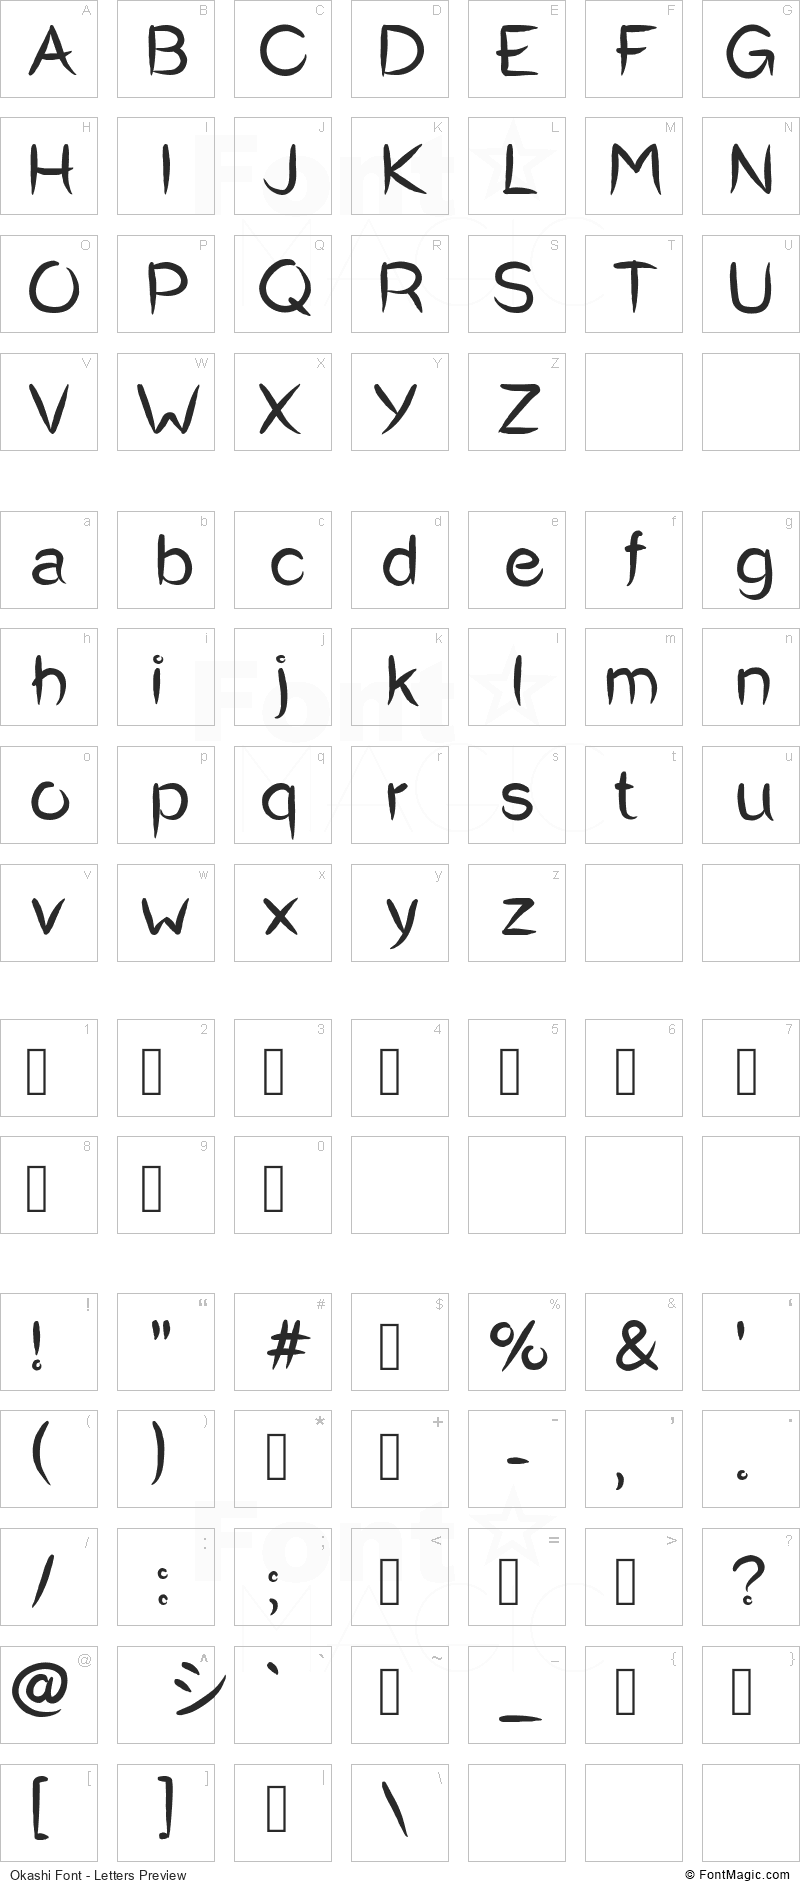 Okashi Font - All Latters Preview Chart